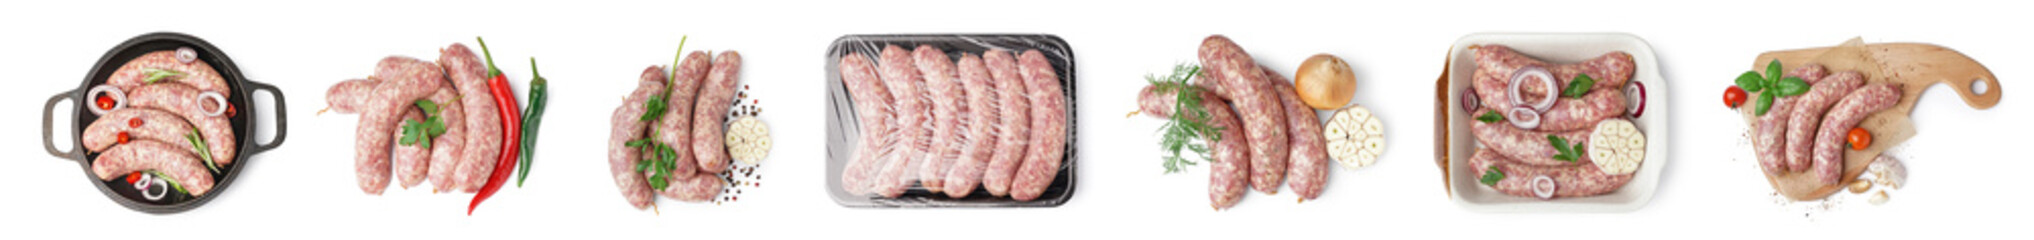 Set of raw sausages on white background, top view